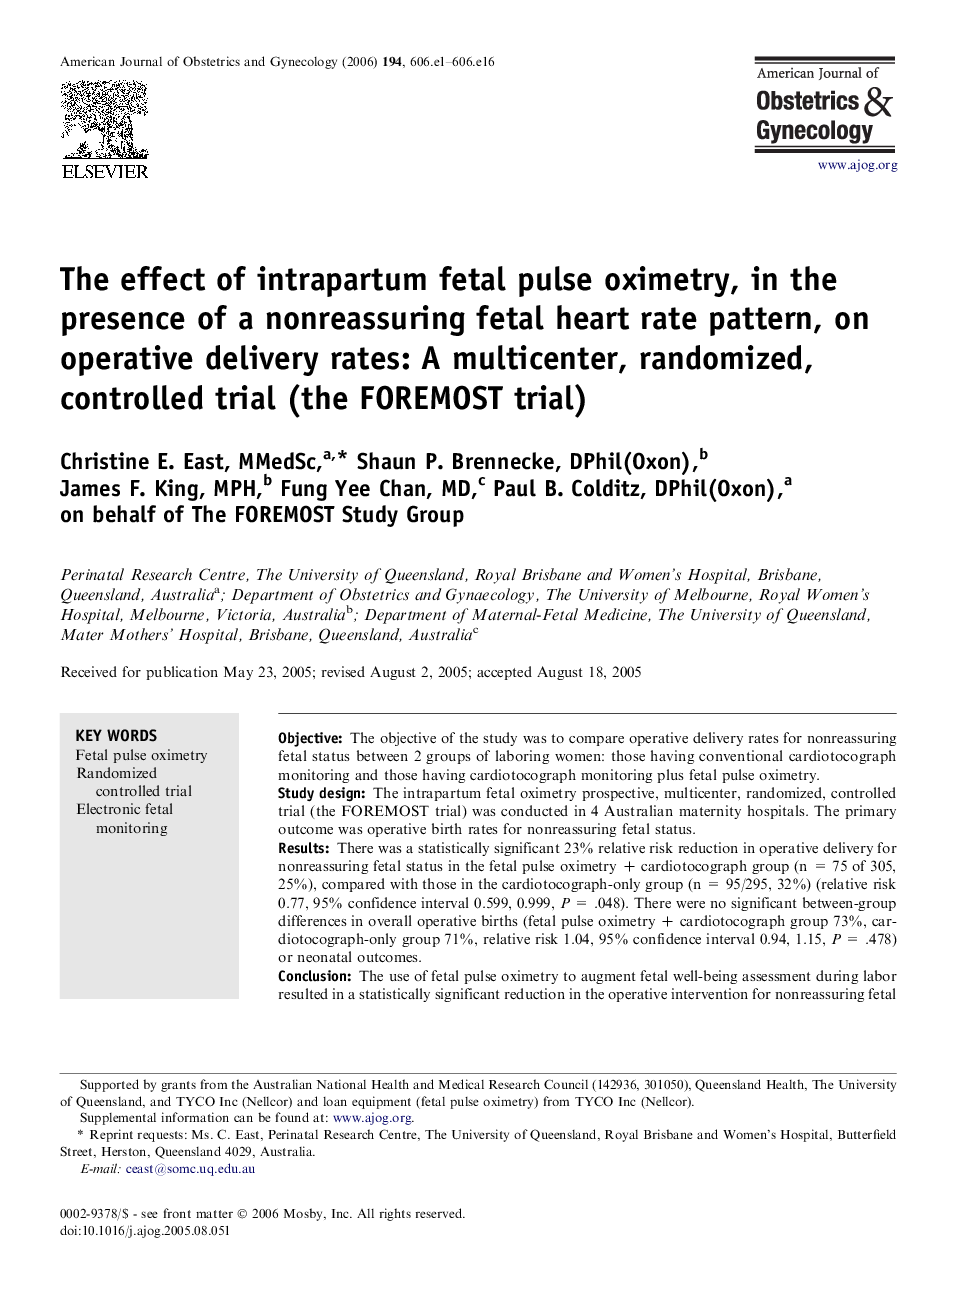 The effect of intrapartum fetal pulse oximetry, in the presence of a nonreassuring fetal heart rate pattern, on operative delivery rates: A multicenter, randomized, controlled trial (the FOREMOST trial)